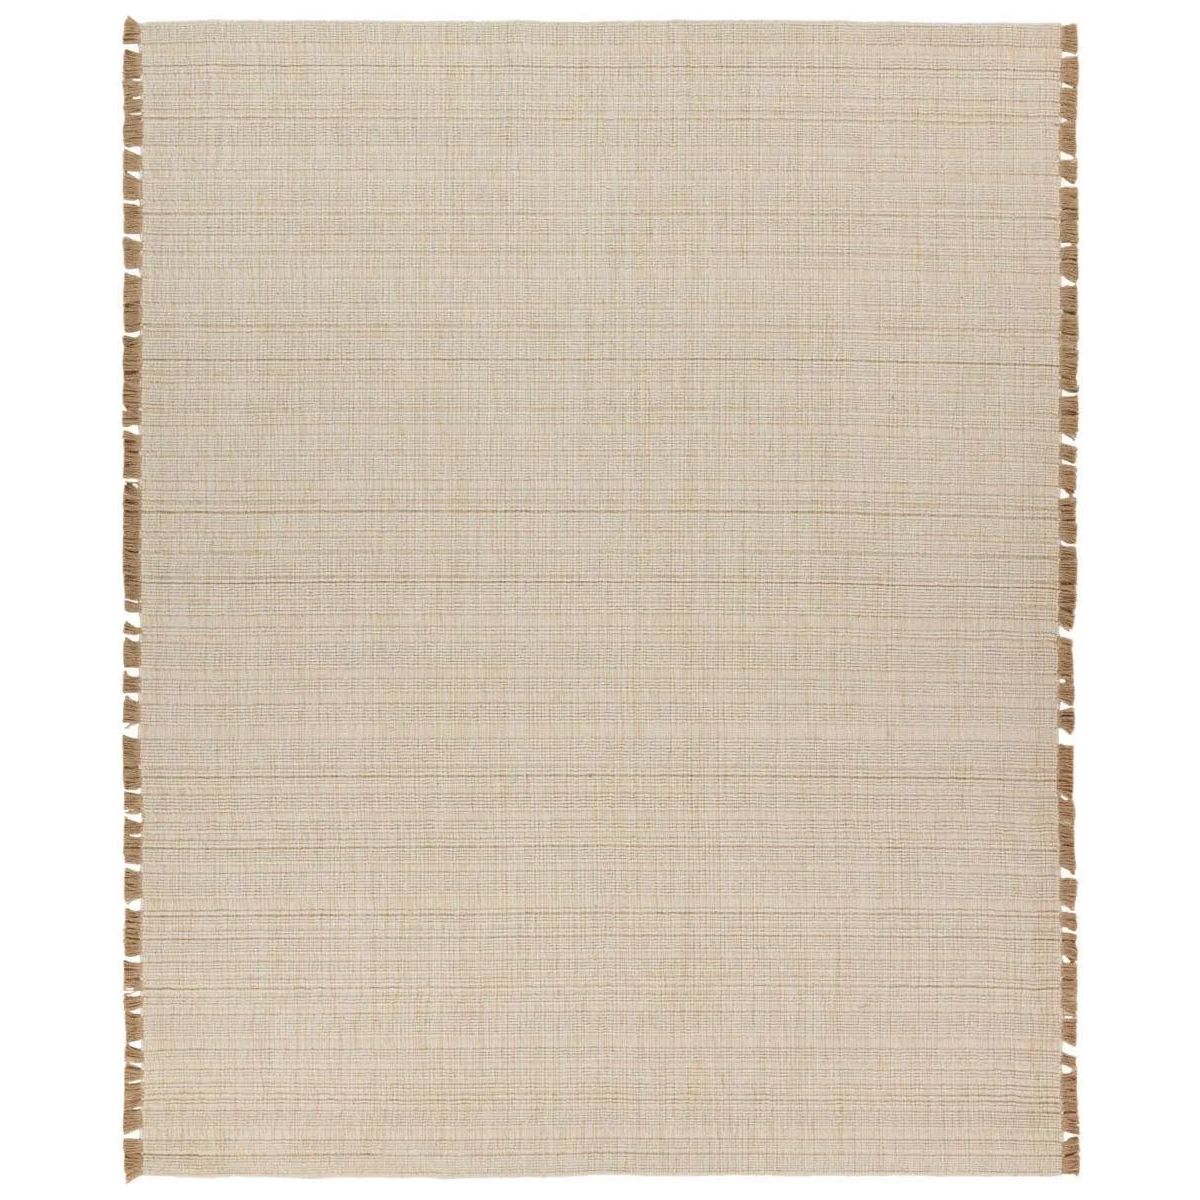 The Tienne Bandera draws inspiration from the natural world through rich texture and a wool, cotton, and jute make. Handloomed by artisans in India, these rugs exude a simple elegance suited for any modern home. The Bandera design?s cream and beige colorway provides a neutral, grounding effect in contemporary spaces. Amethyst Home provides interior design, new home construction design consulting, vintage area rugs, and lighting in the Salt Lake City metro area.